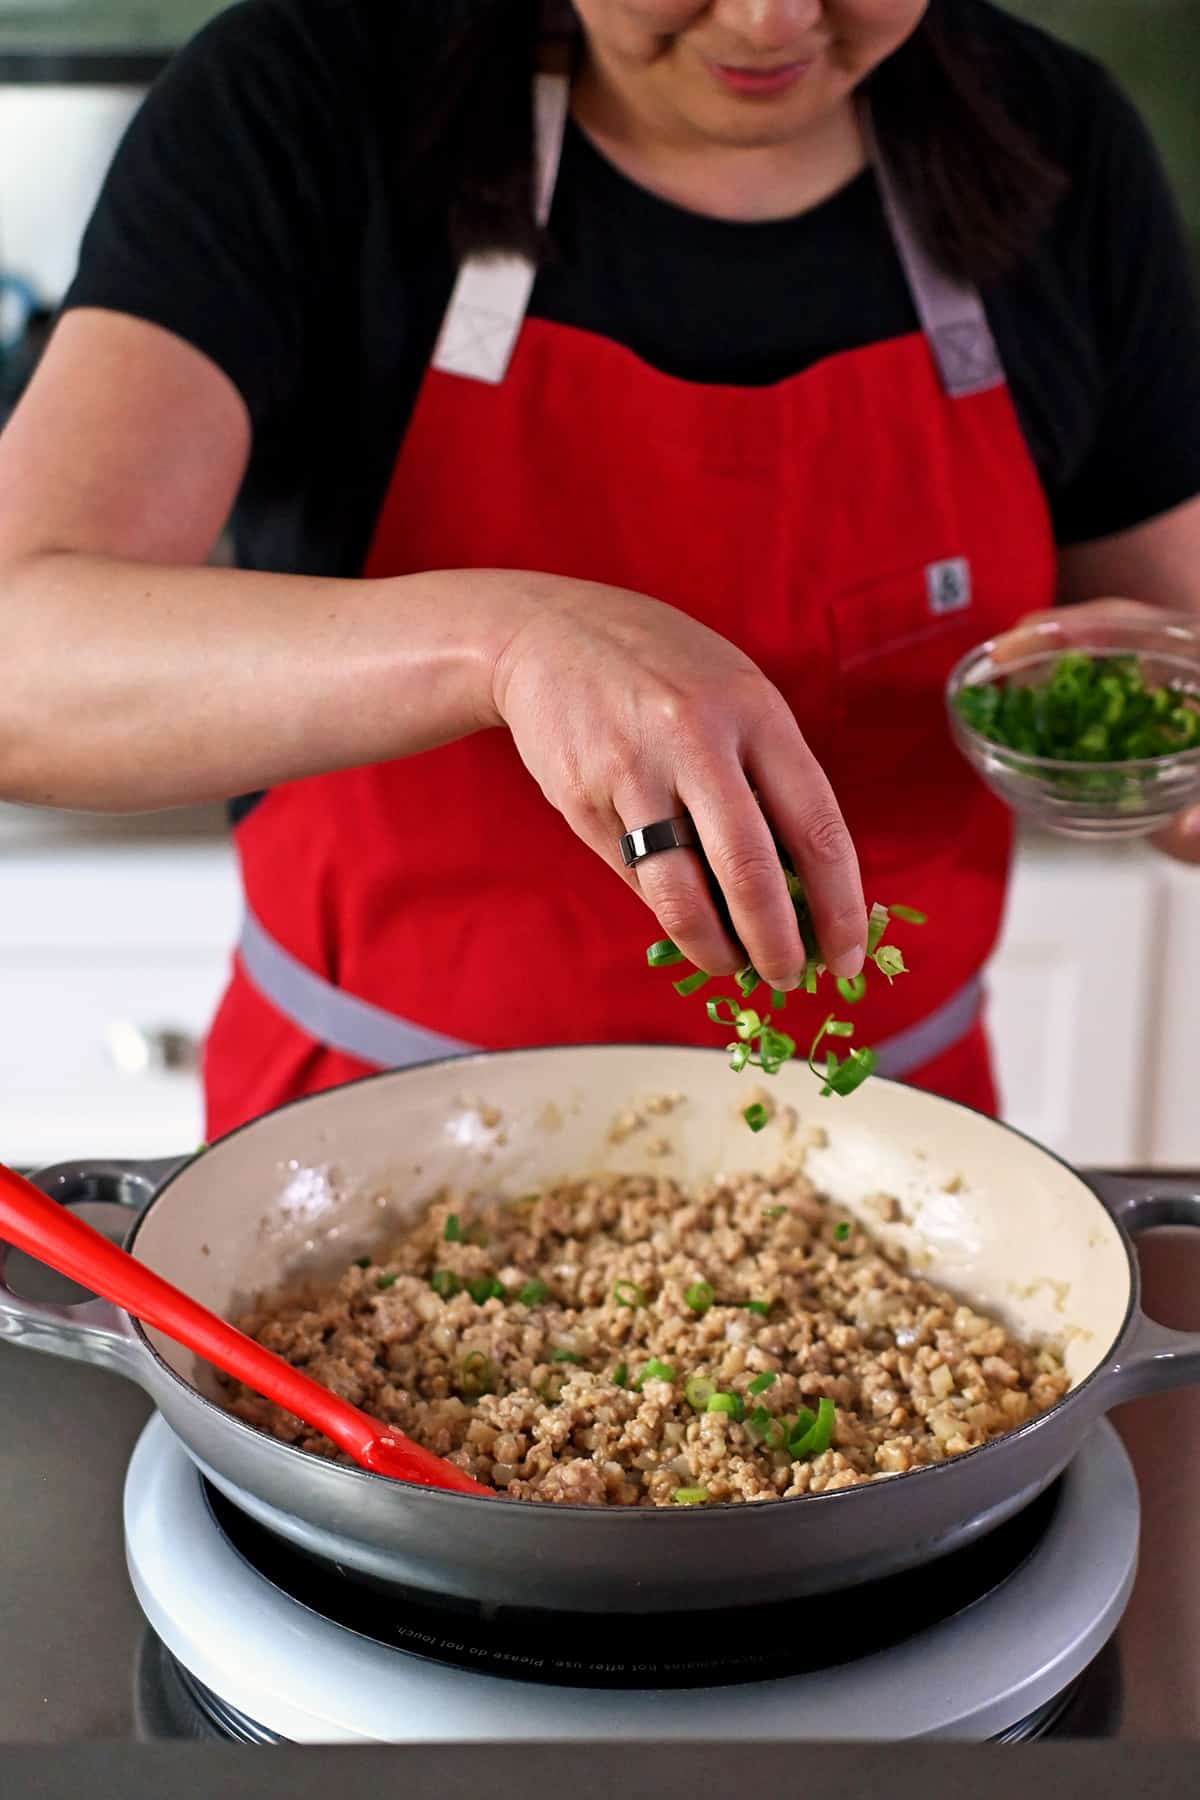 Sprinkling sliced green onions into a skillet filled with ground chicken lettuce wrap filling.